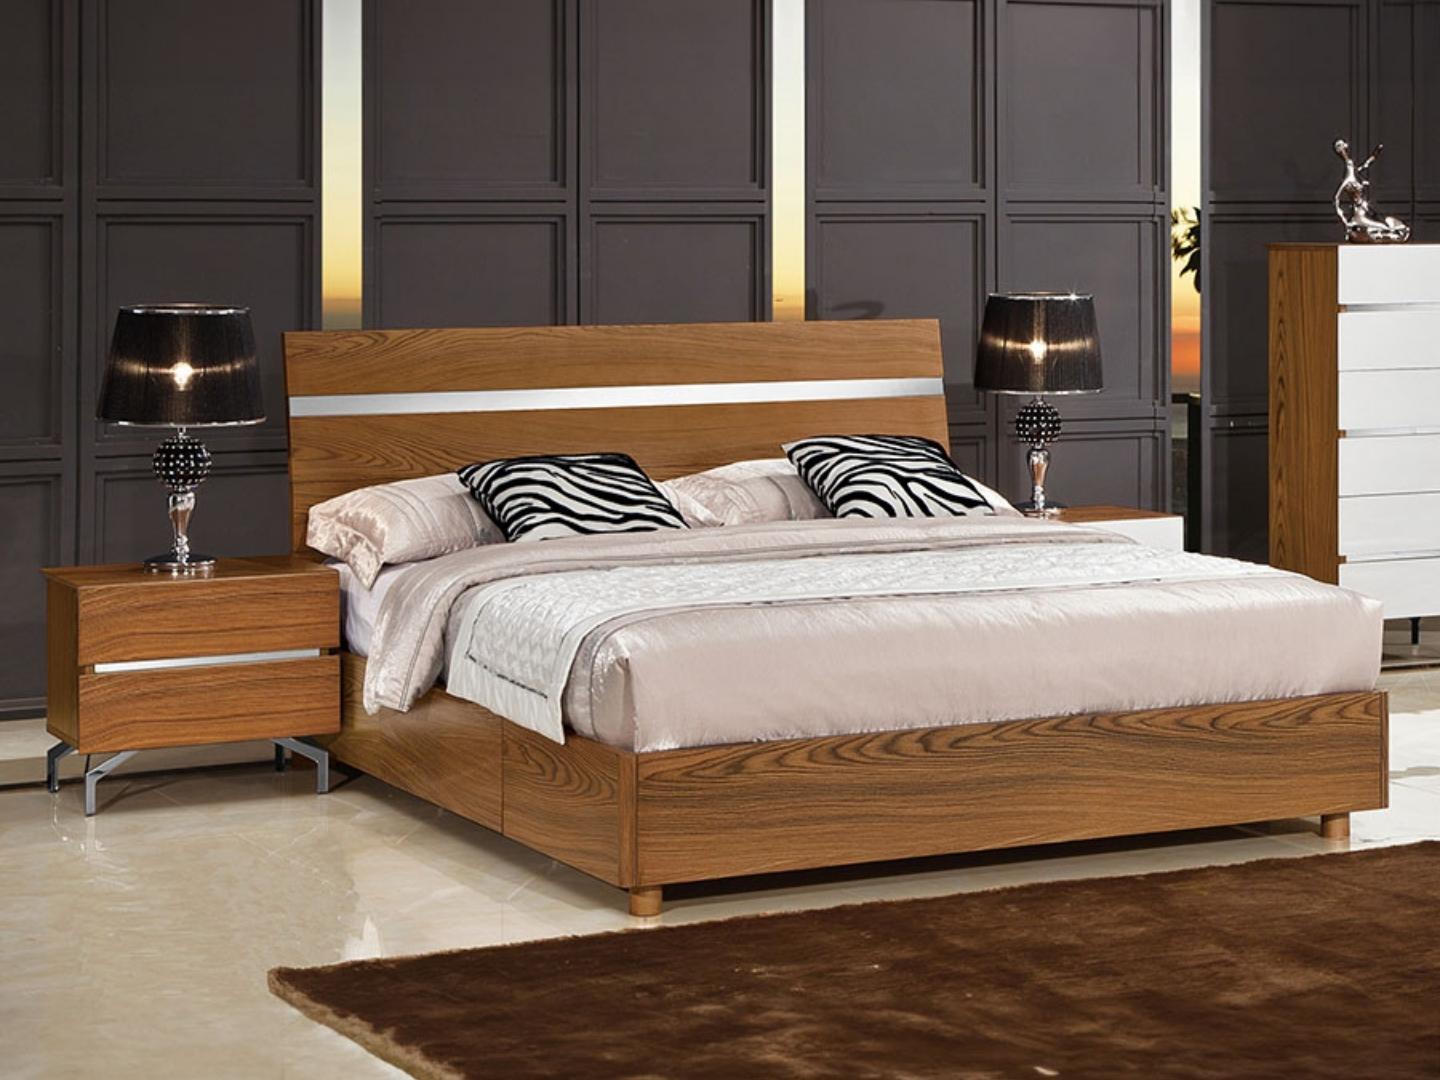 bed set with nightstands -Lux Furniture